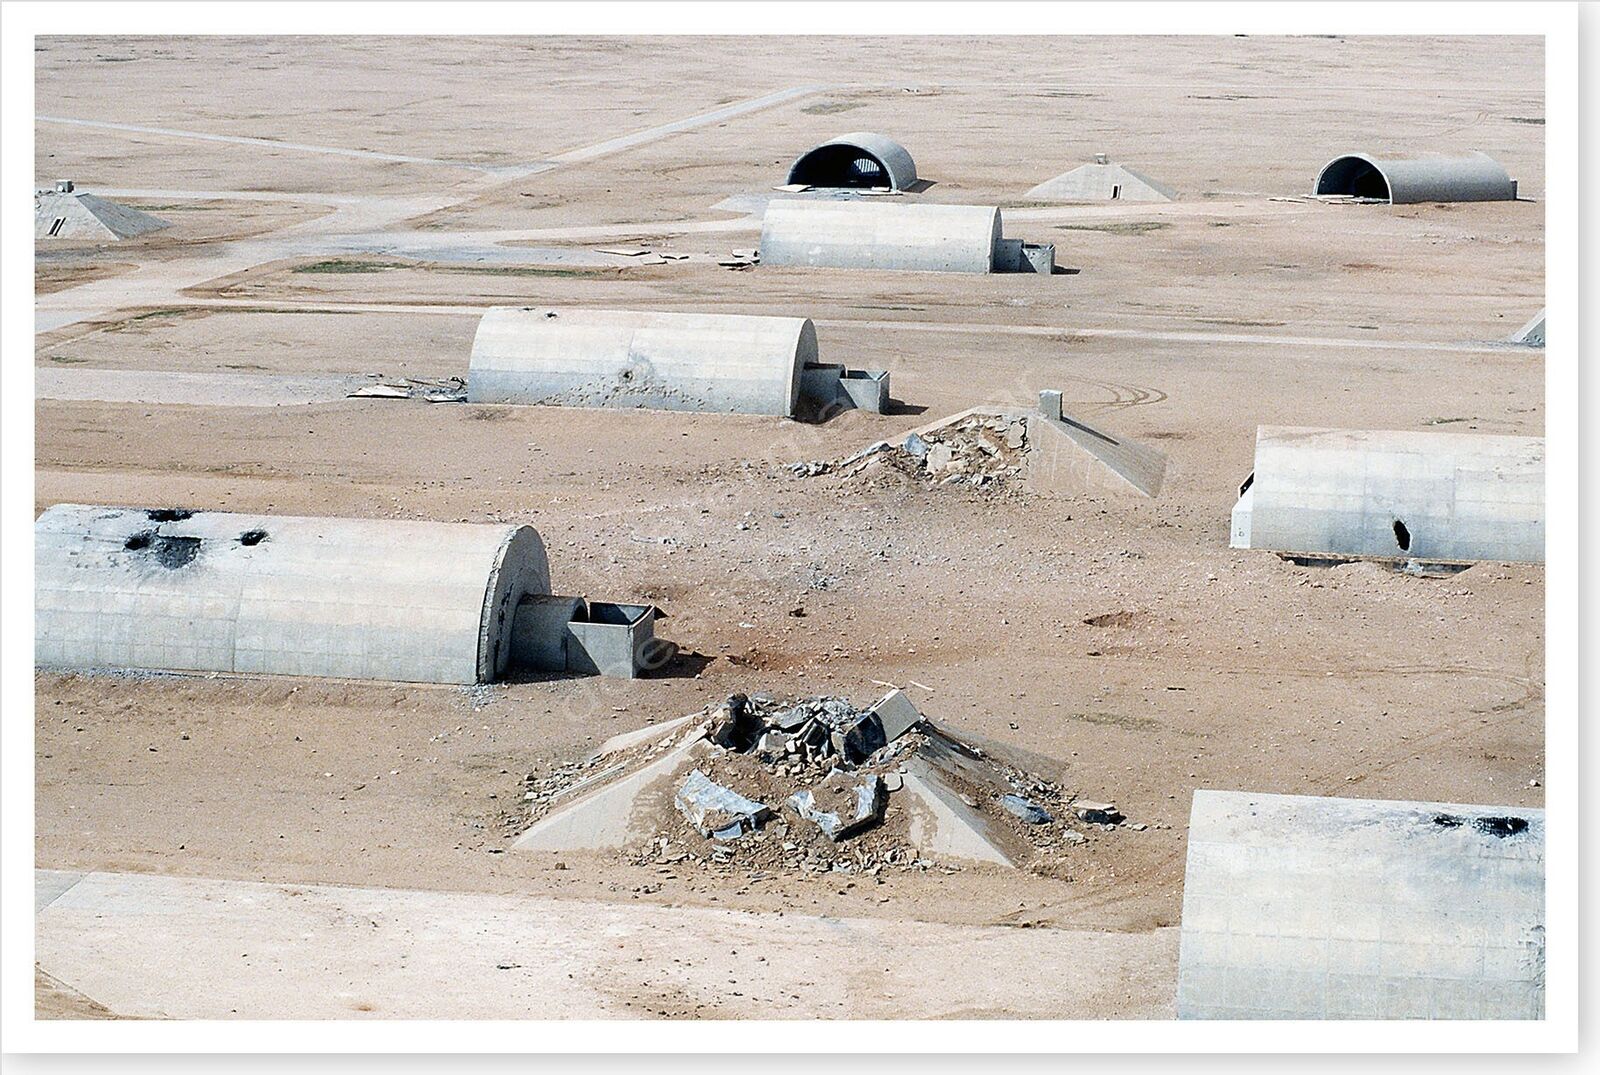 Damage To Hardened Aircraft Bunkers Iraq Operation Desert Storm 8x12 Photo